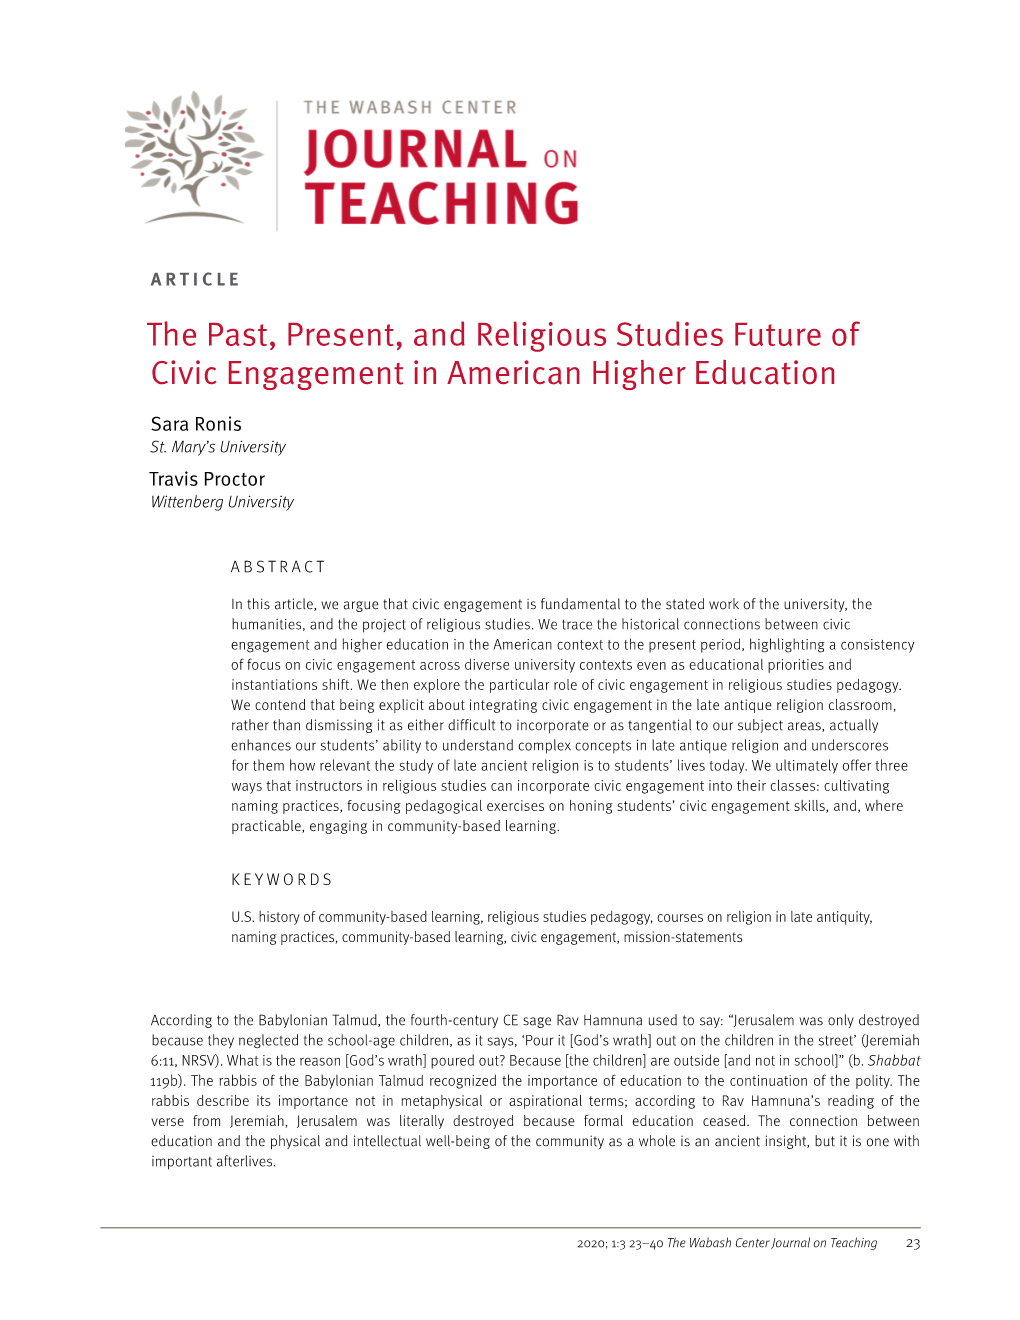 The Past, Present, and Religious Studies Future of Civic Engagement in American Higher Education